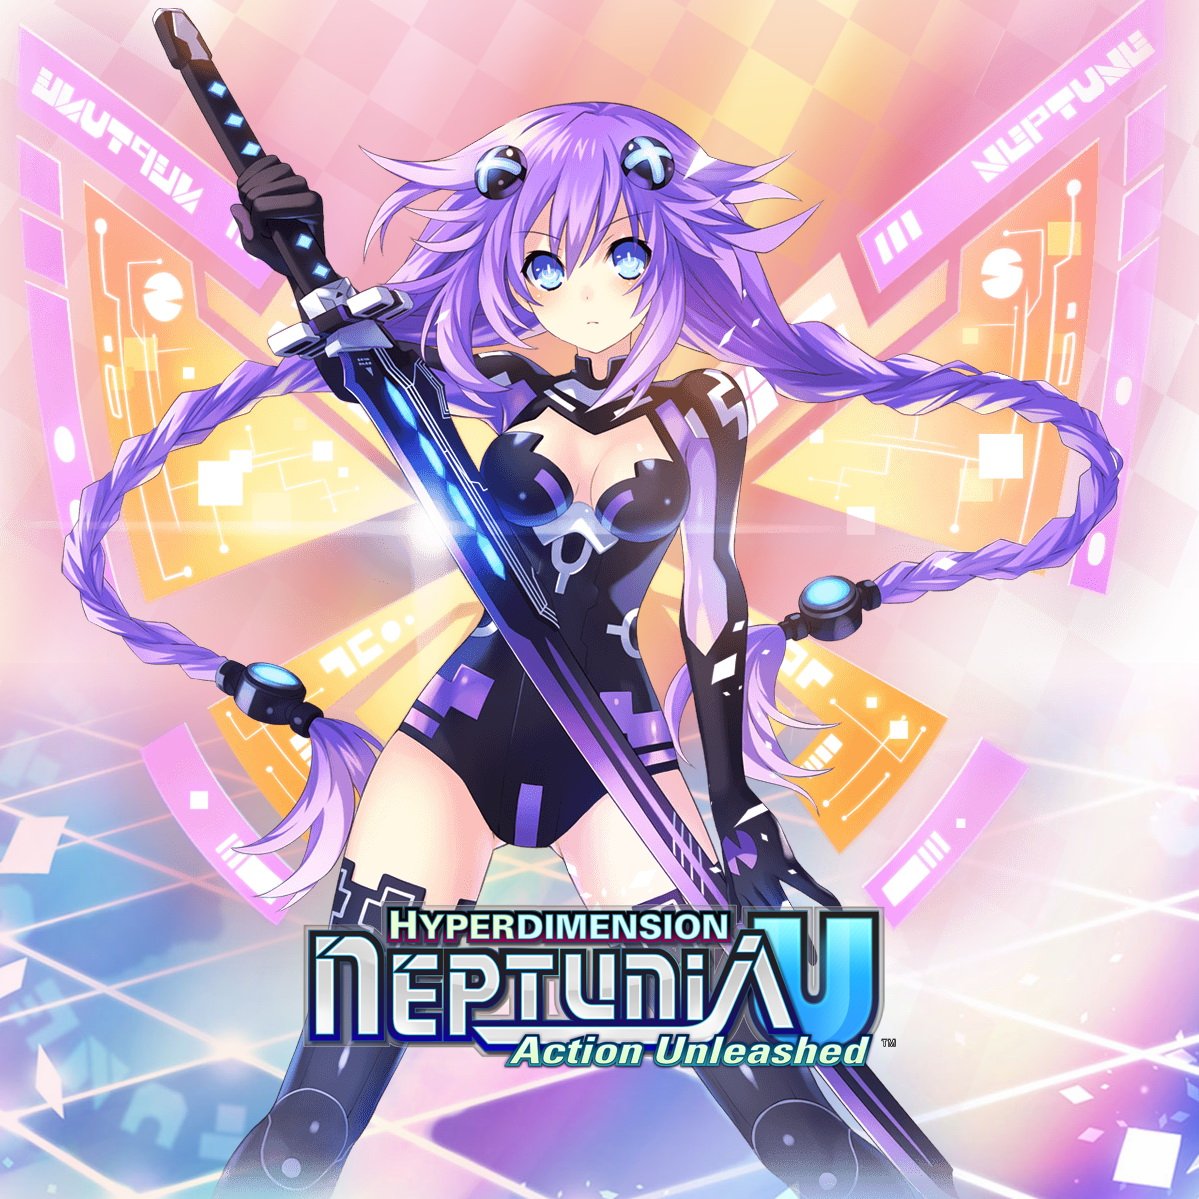 Hyperdimension Neptunia U: Action Unleashed 100% Complete Game Save